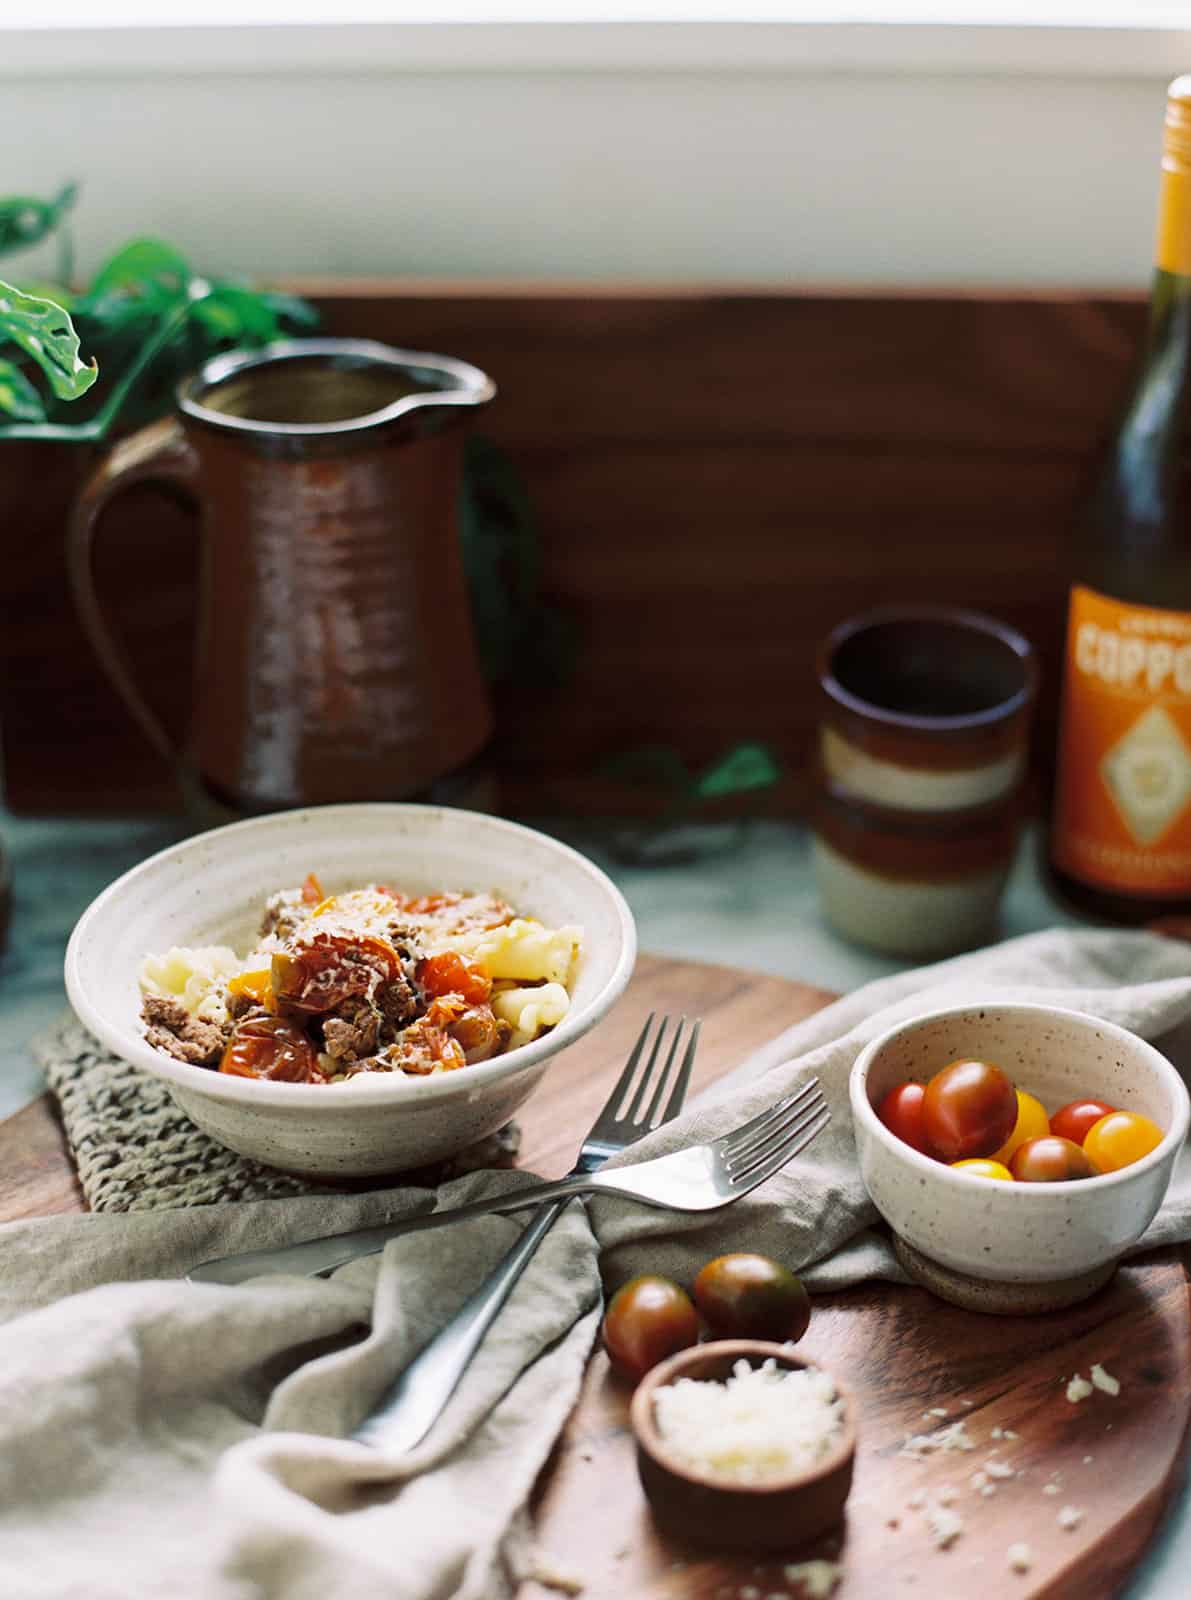 Easy Venison Pasta Recipe with Sun Gold Tomatoes | Find the recipe at everlyraine.com by Katie O. Selvidge